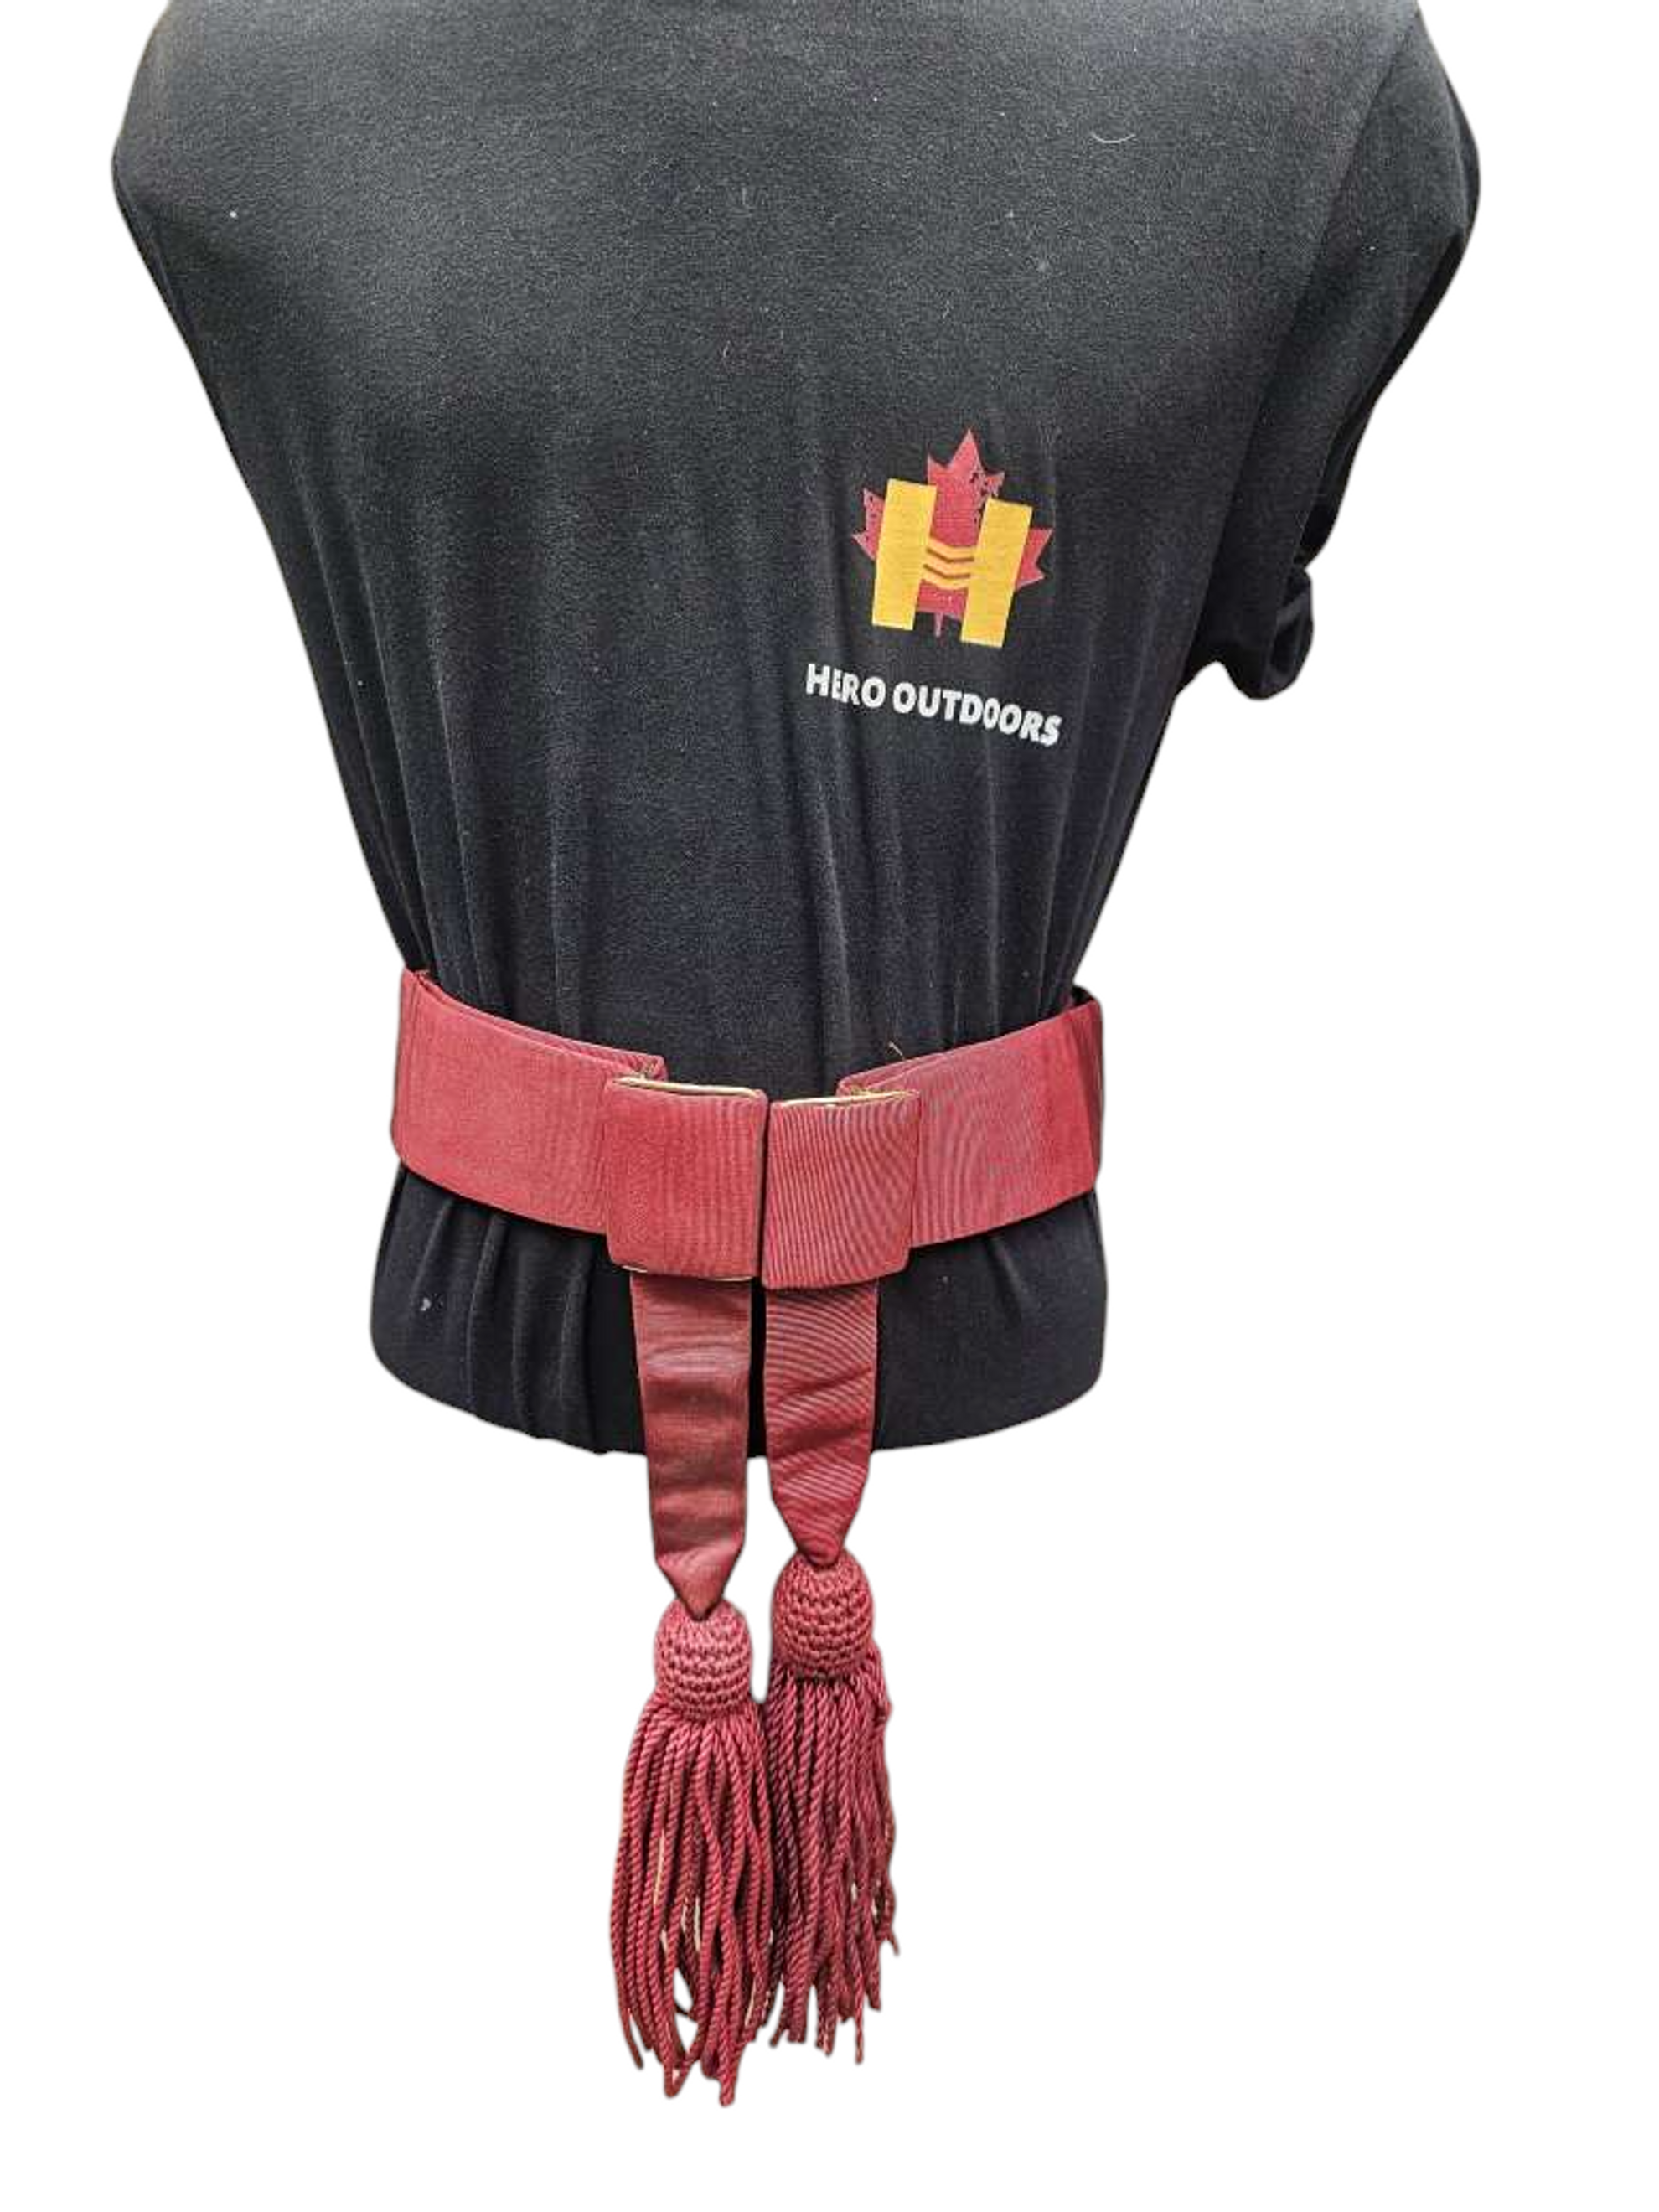 Canadian Armed Forces Red Ceremonial Waist Sash - Complete